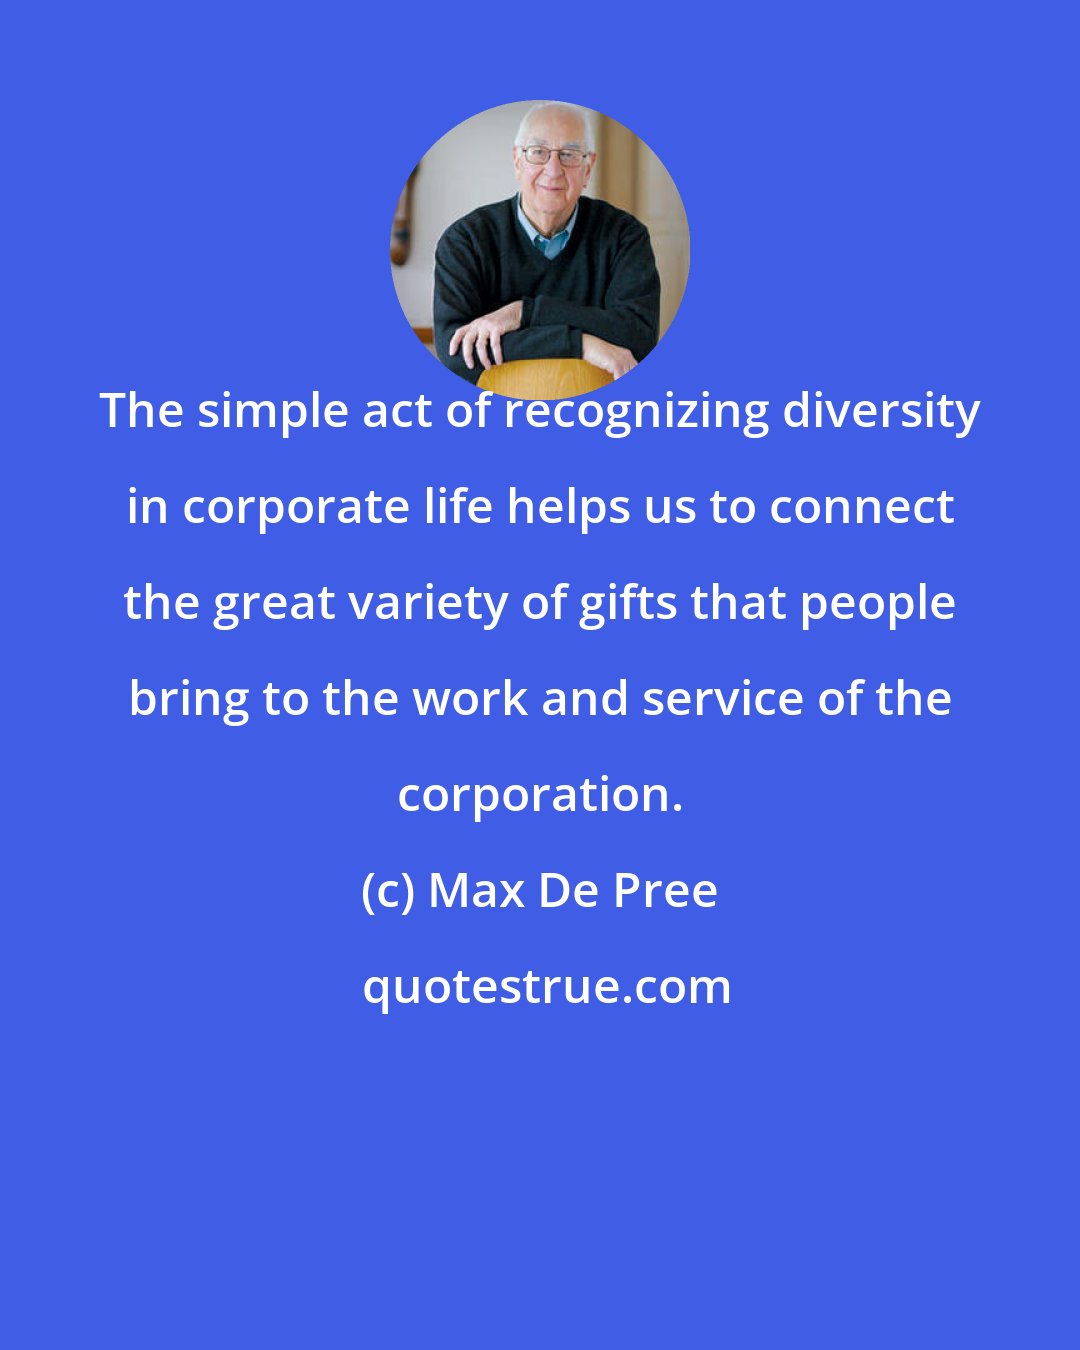 Max De Pree: The simple act of recognizing diversity in corporate life helps us to connect the great variety of gifts that people bring to the work and service of the corporation.